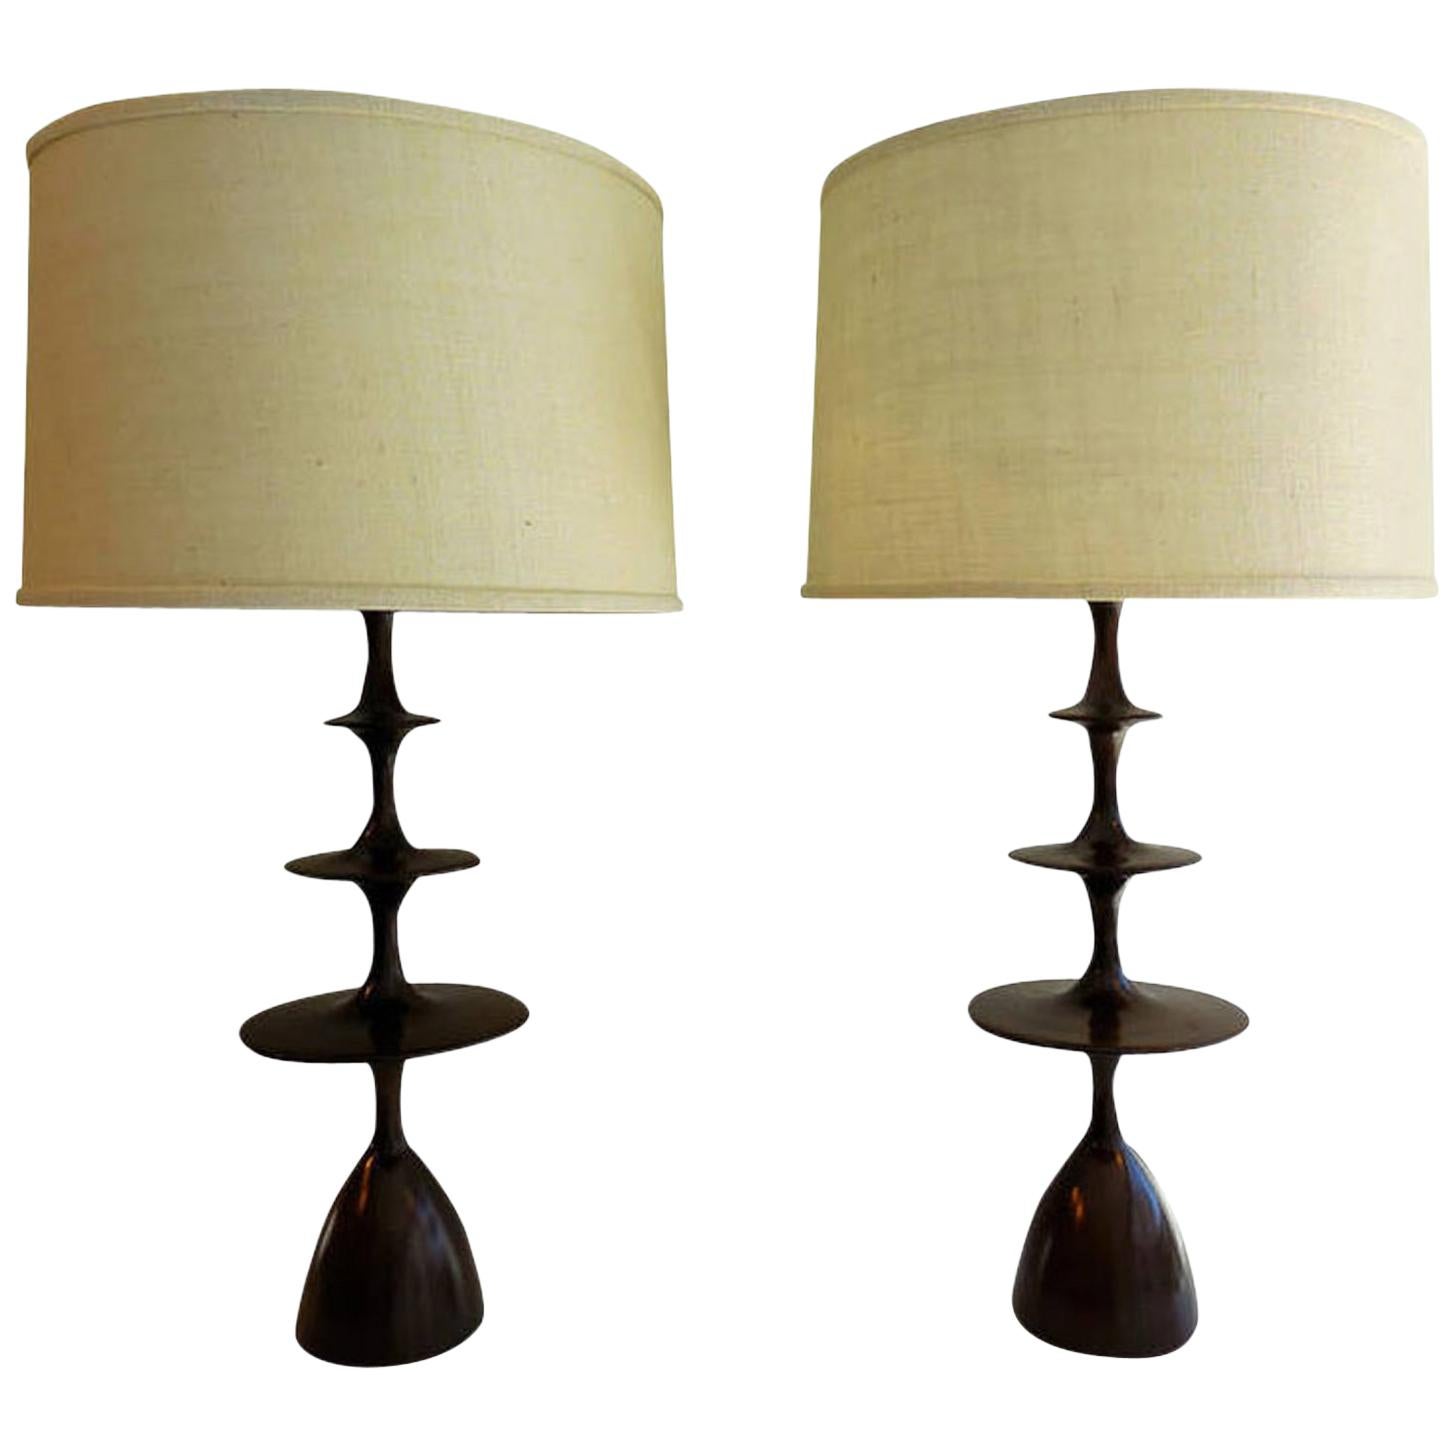 Christopher Anthony Ltd. "Metro" Table Lamp in Polished Walnut For Sale